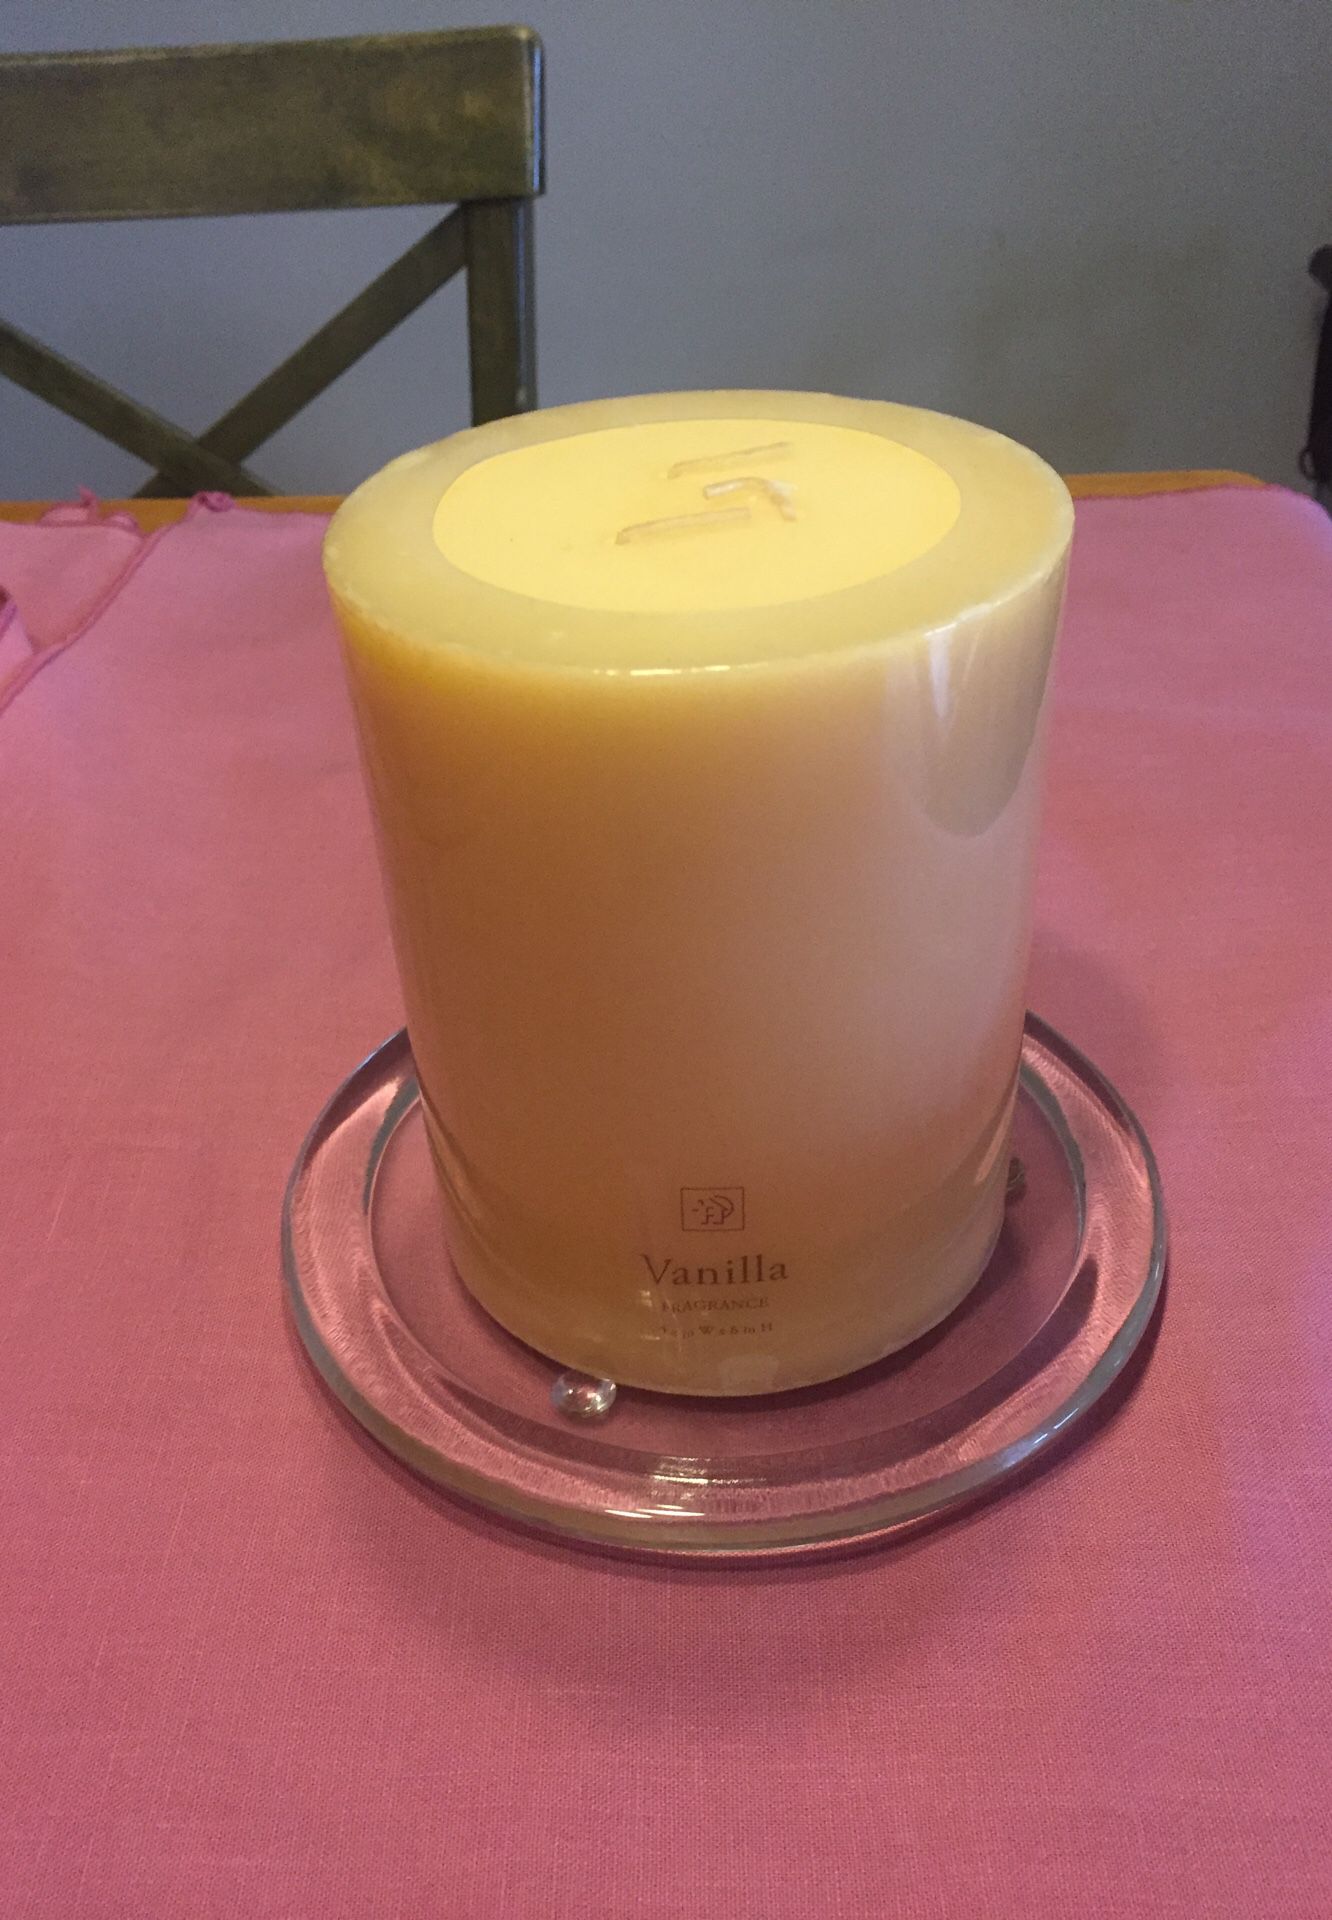 Large vanilla candle with holder $15